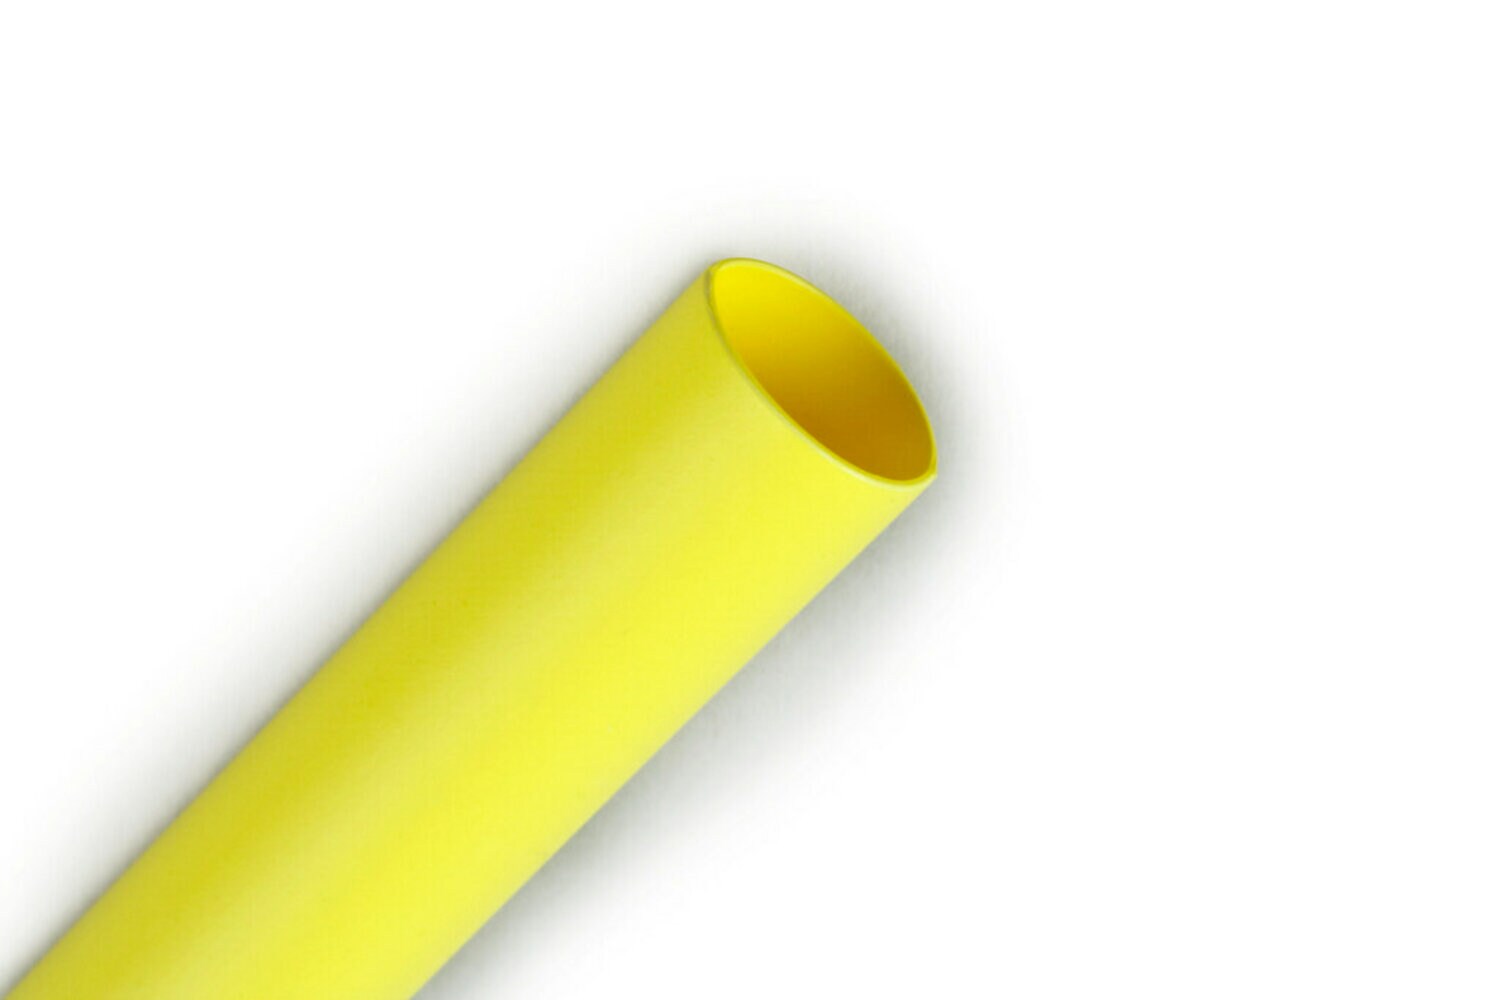 7010292285 - 3M Heat Shrink Thin-Wall Tubing FP-301-1/2-48"-Yellow-100 Pcs, 48 in
Length sticks, 100 pieces/case